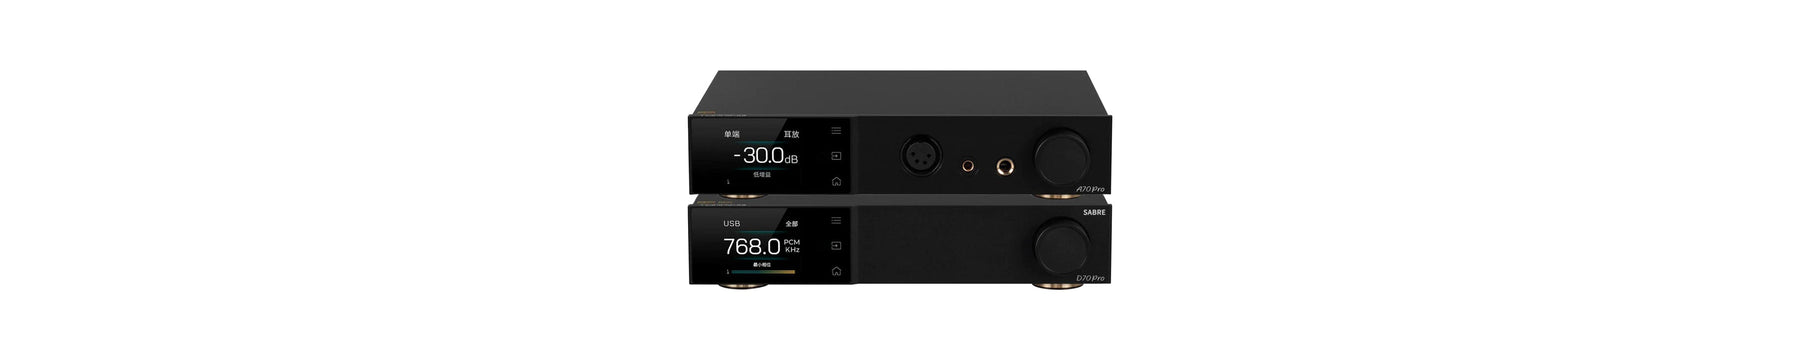 Topping Releases A70 Pro Headphone Amplifier & D70 Pro Sabre Flagship ES9039SPro DAC